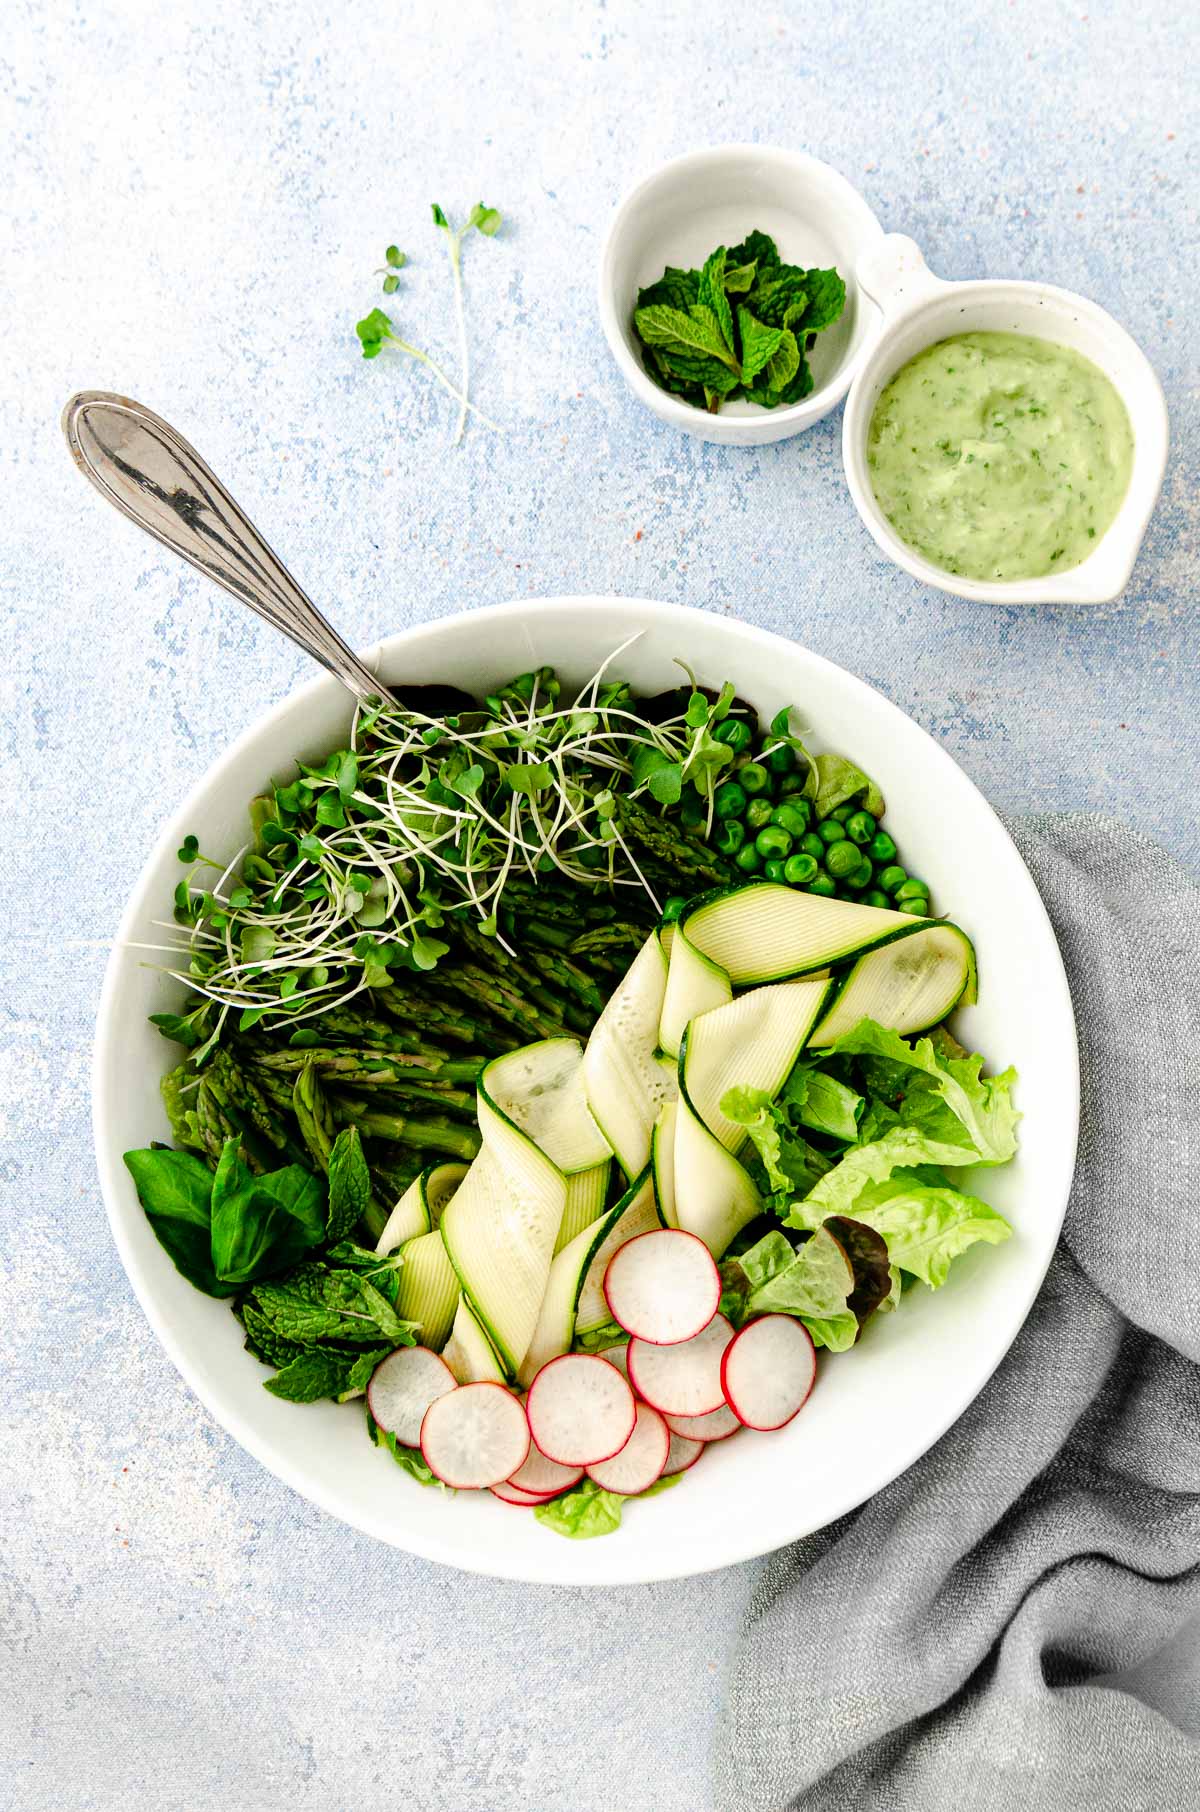 Green goddess salad with butter lettuce, radishes, mint, asparagus, peas, zucchini ribbons with a small dish of vegan avocado green goddess dressing a mint.